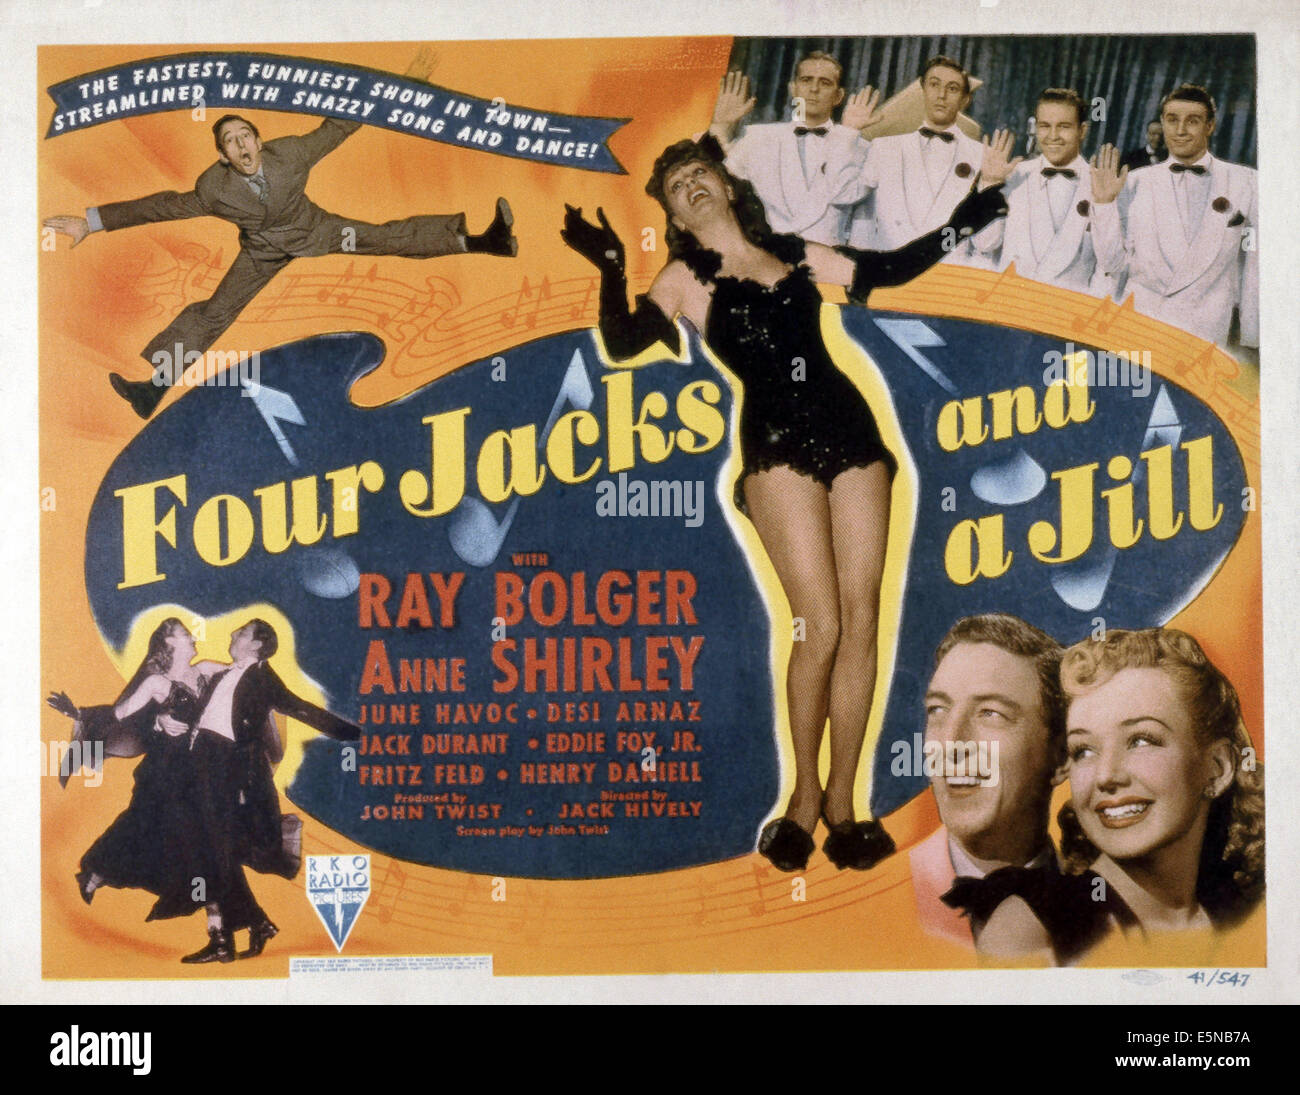 FOUR JACKS AND A JILL, Ray Bolger (top left), bottom left from left ...